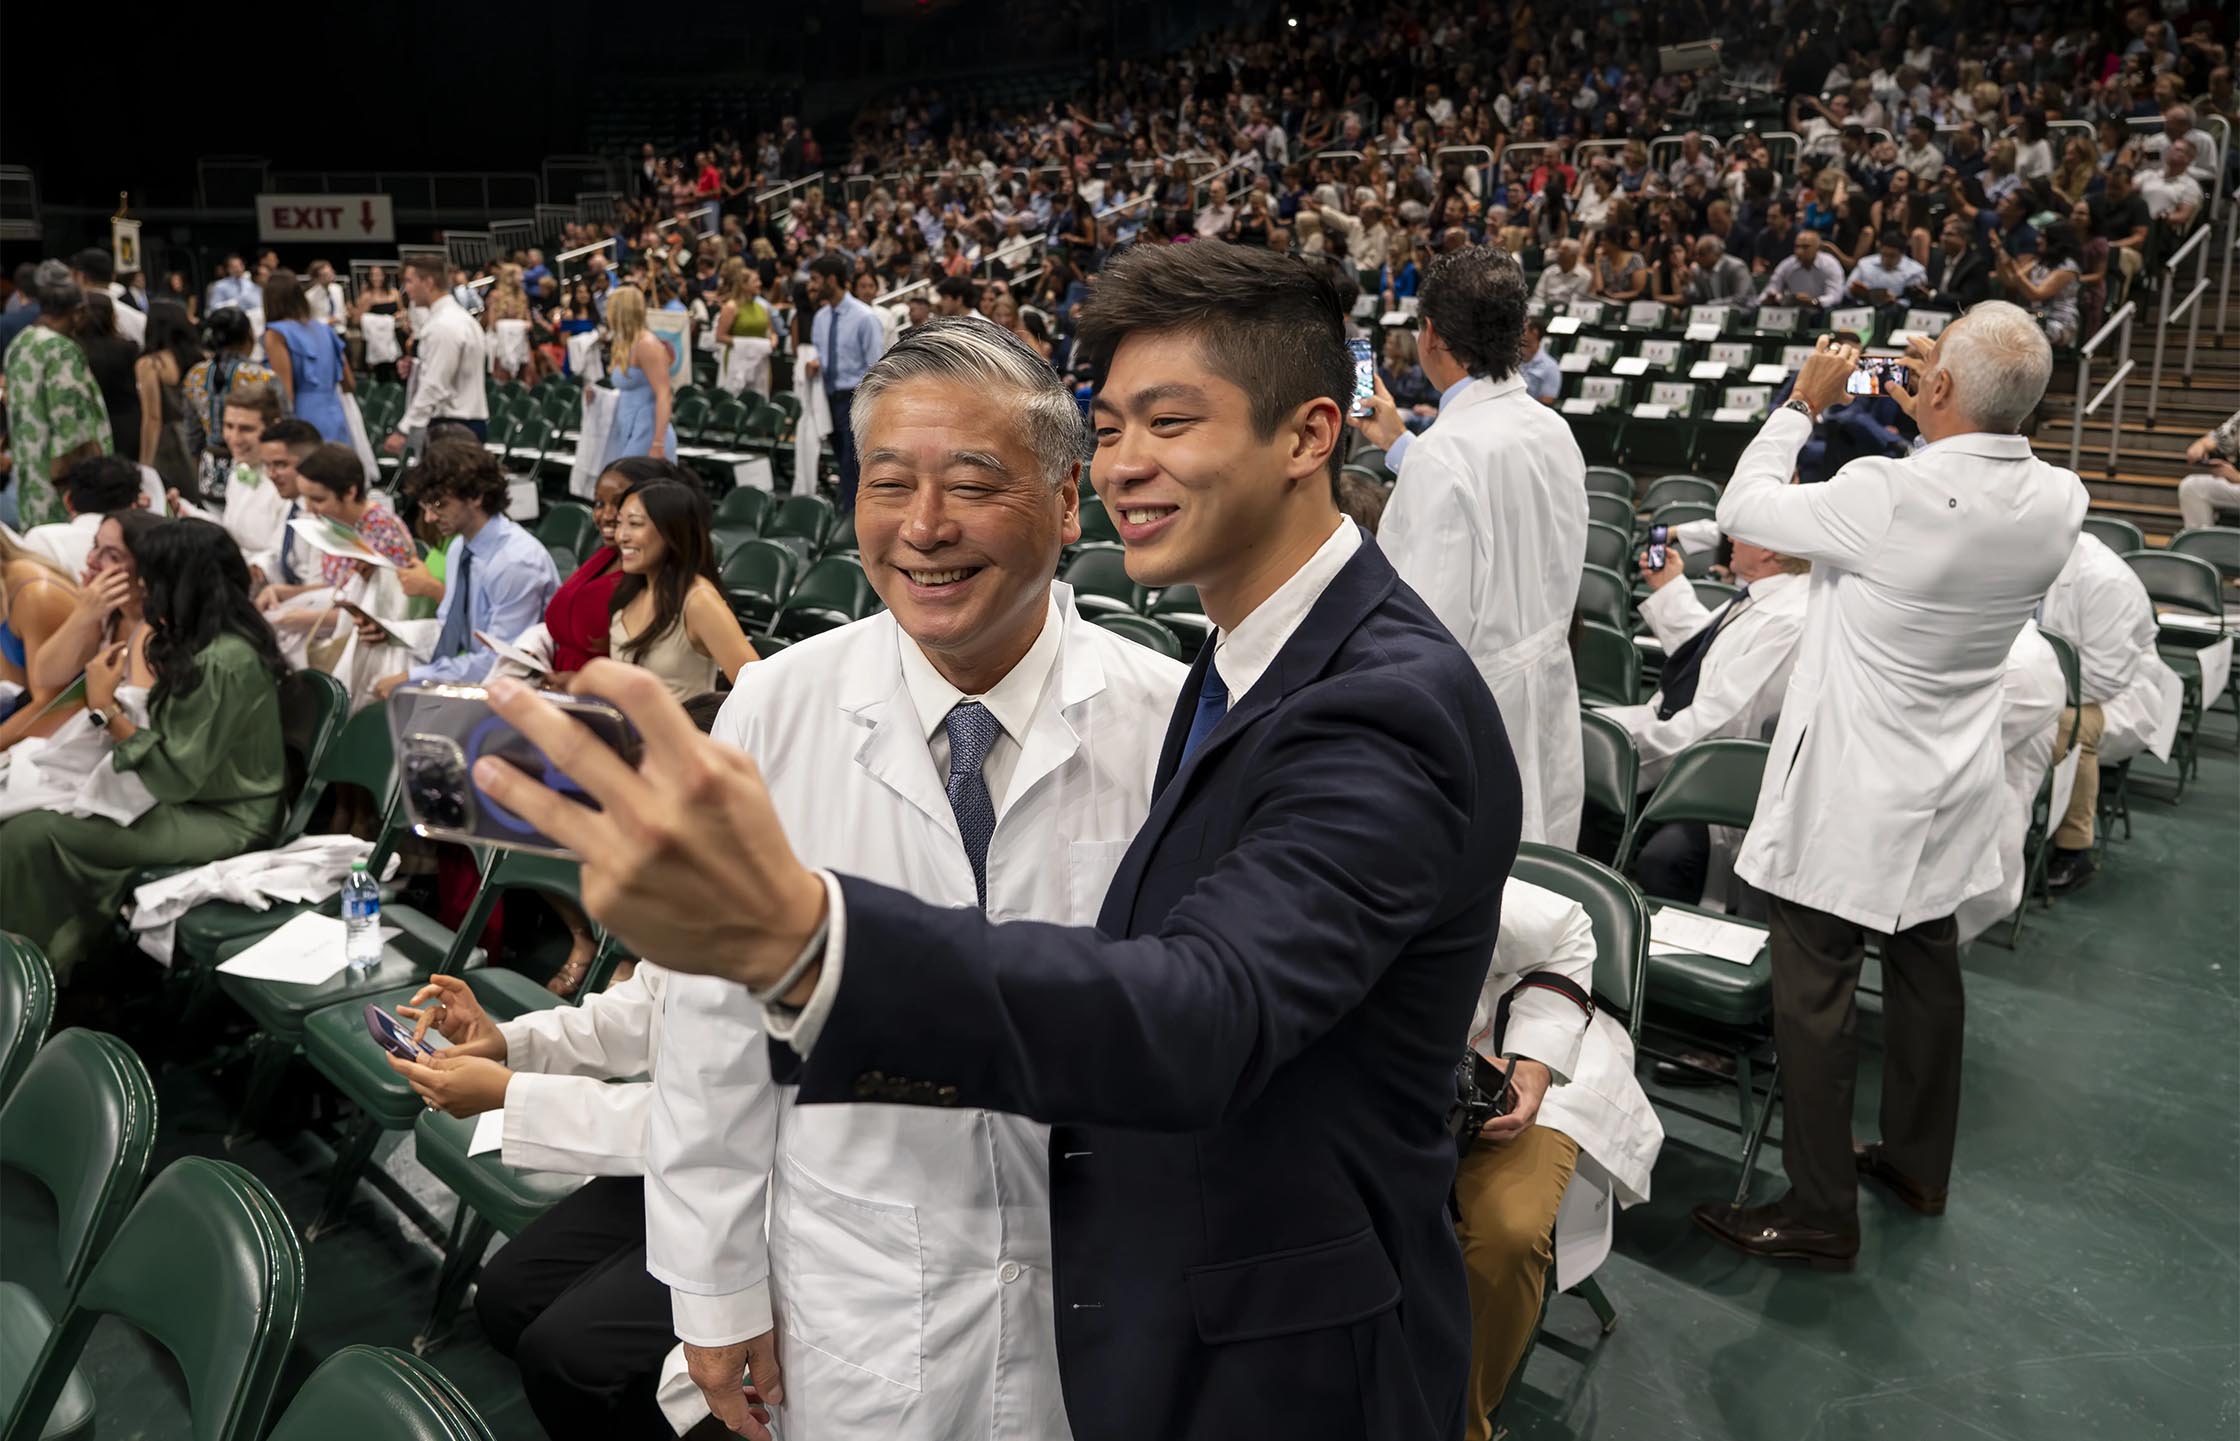 2. William Hwang, M.D. ’87, and son Kevin Hwang, M.D. candidate, Class of 2027